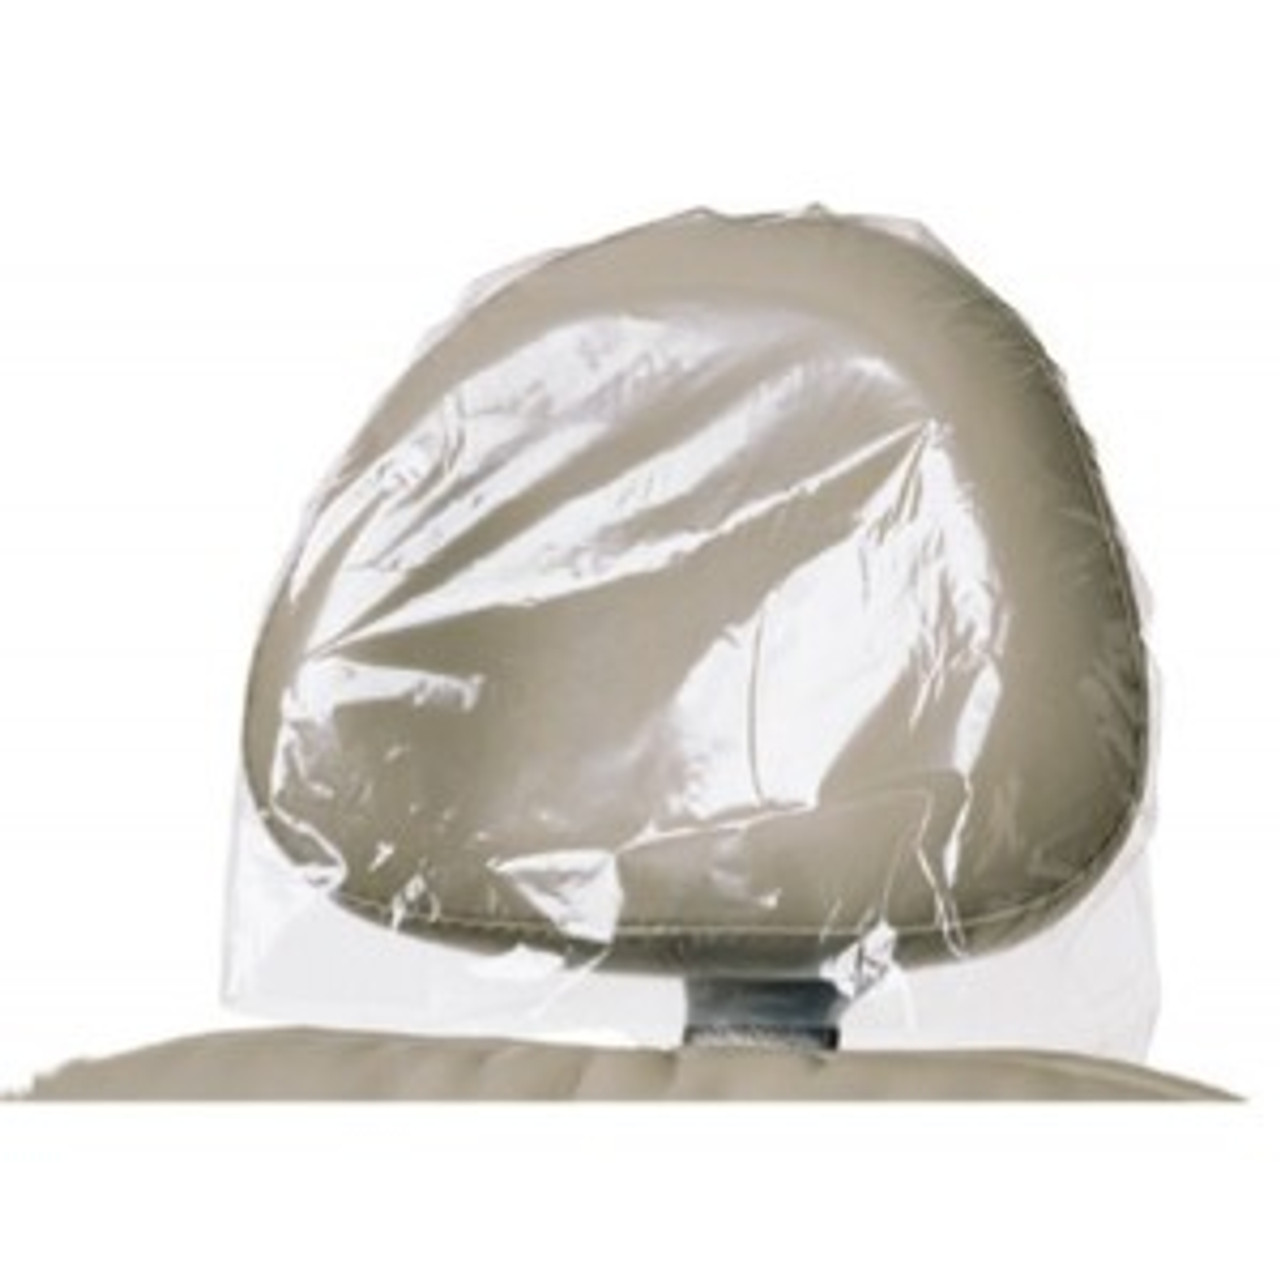 Defend Plastic Headrest Cover 9.5" X 11" Clear 250/bx